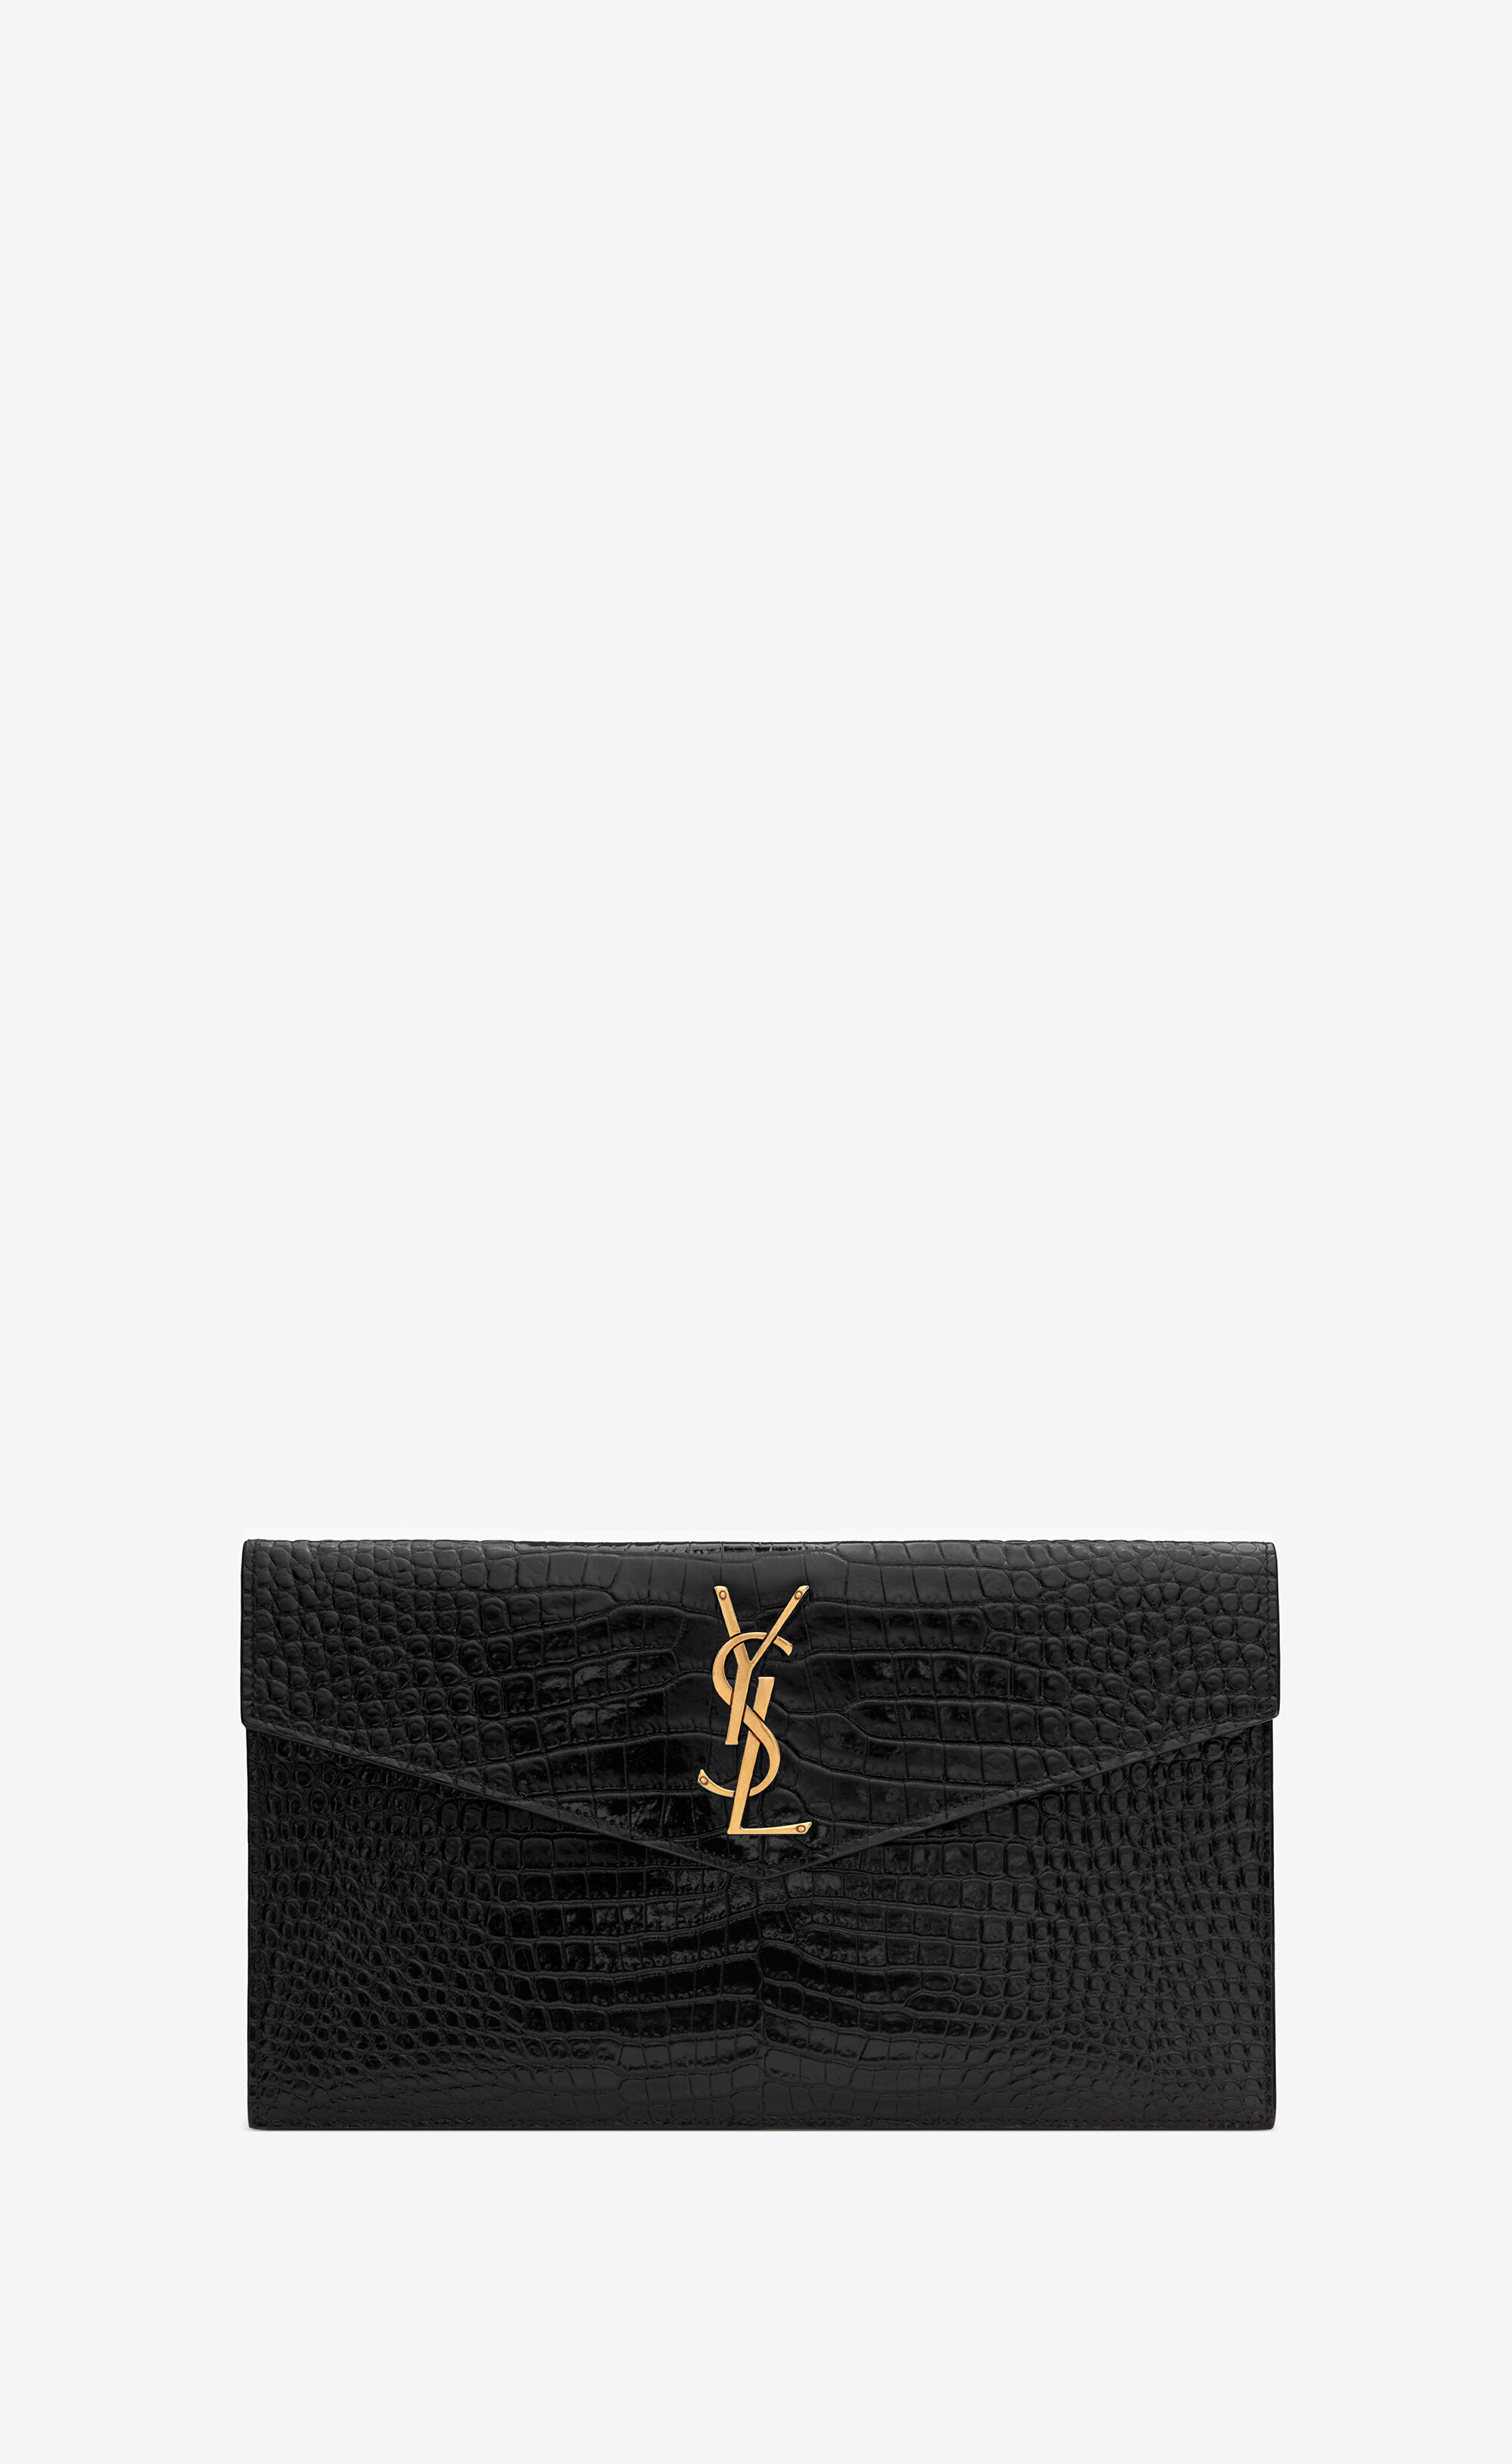 Saint Laurent Uptown Black Leather Shiny Monogram Small Pouch 565733 –  Queen Bee of Beverly Hills